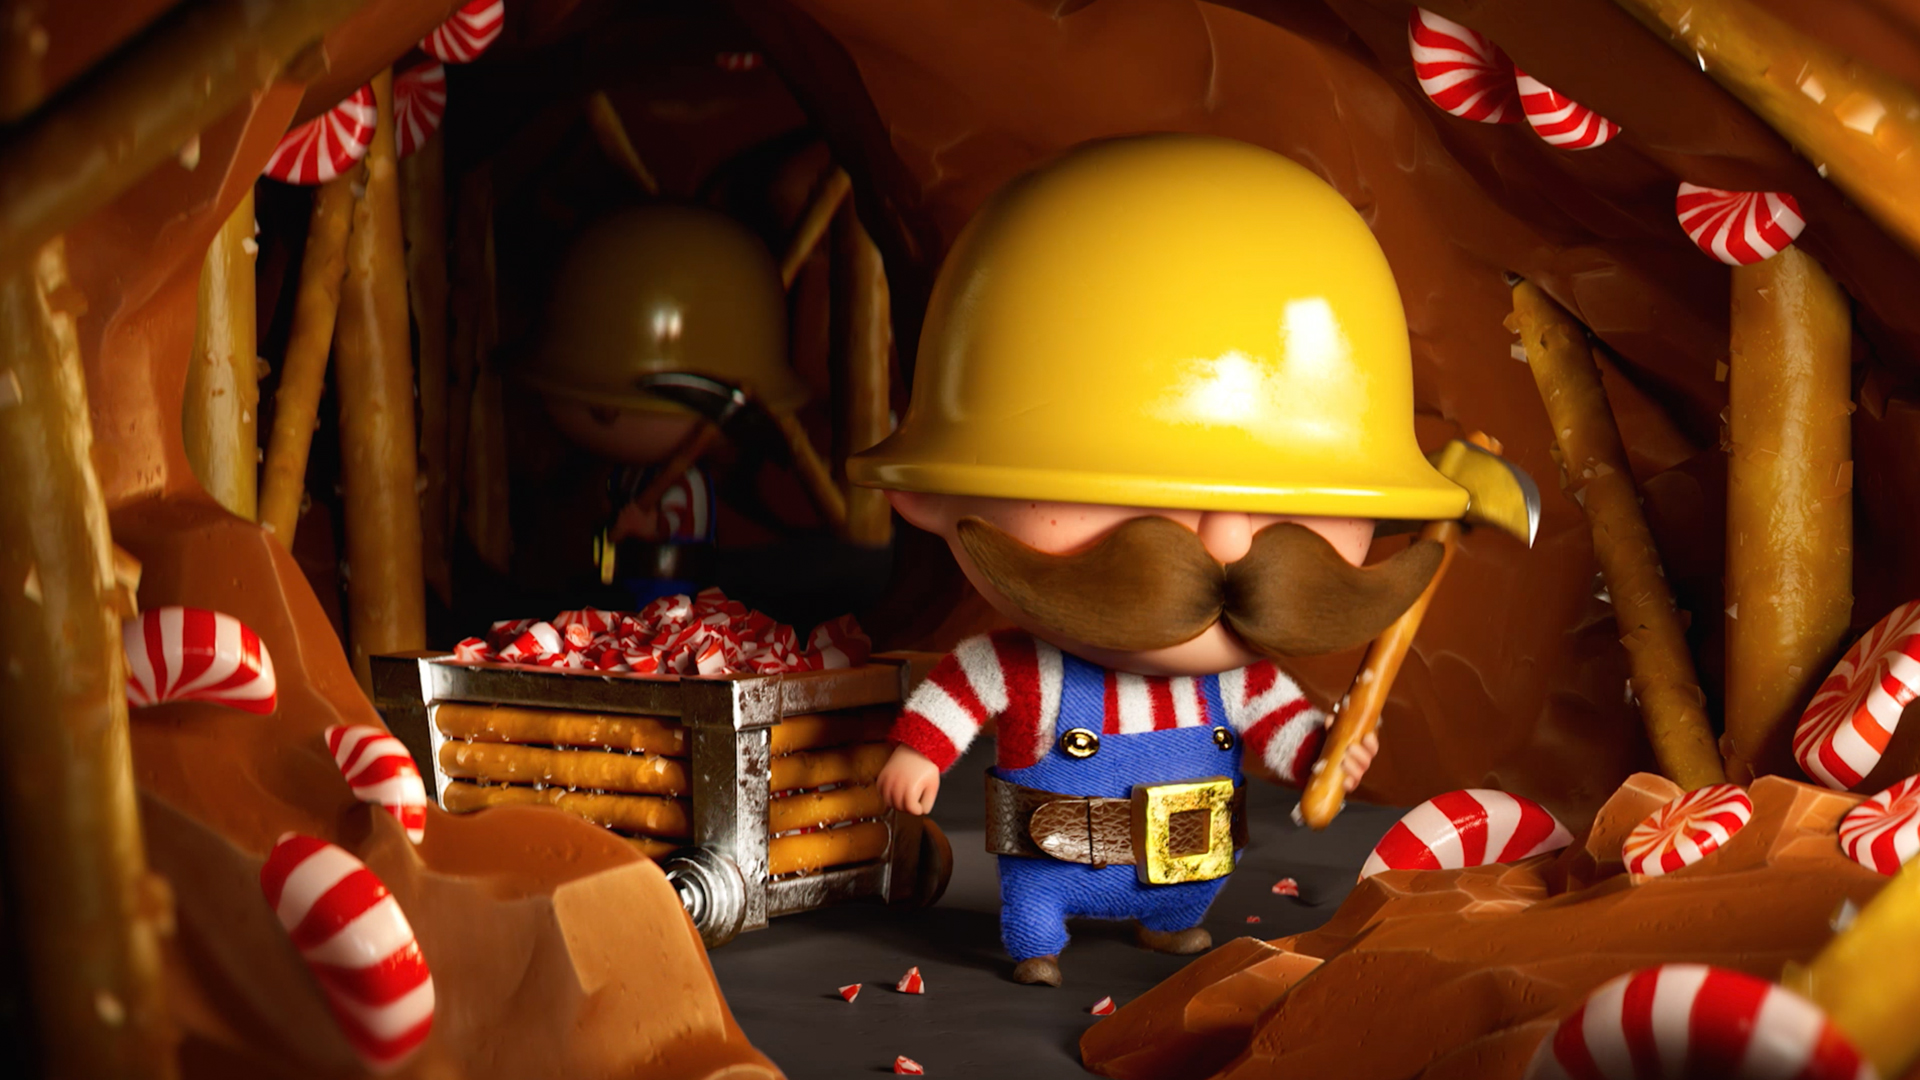 The Peppermint Mine